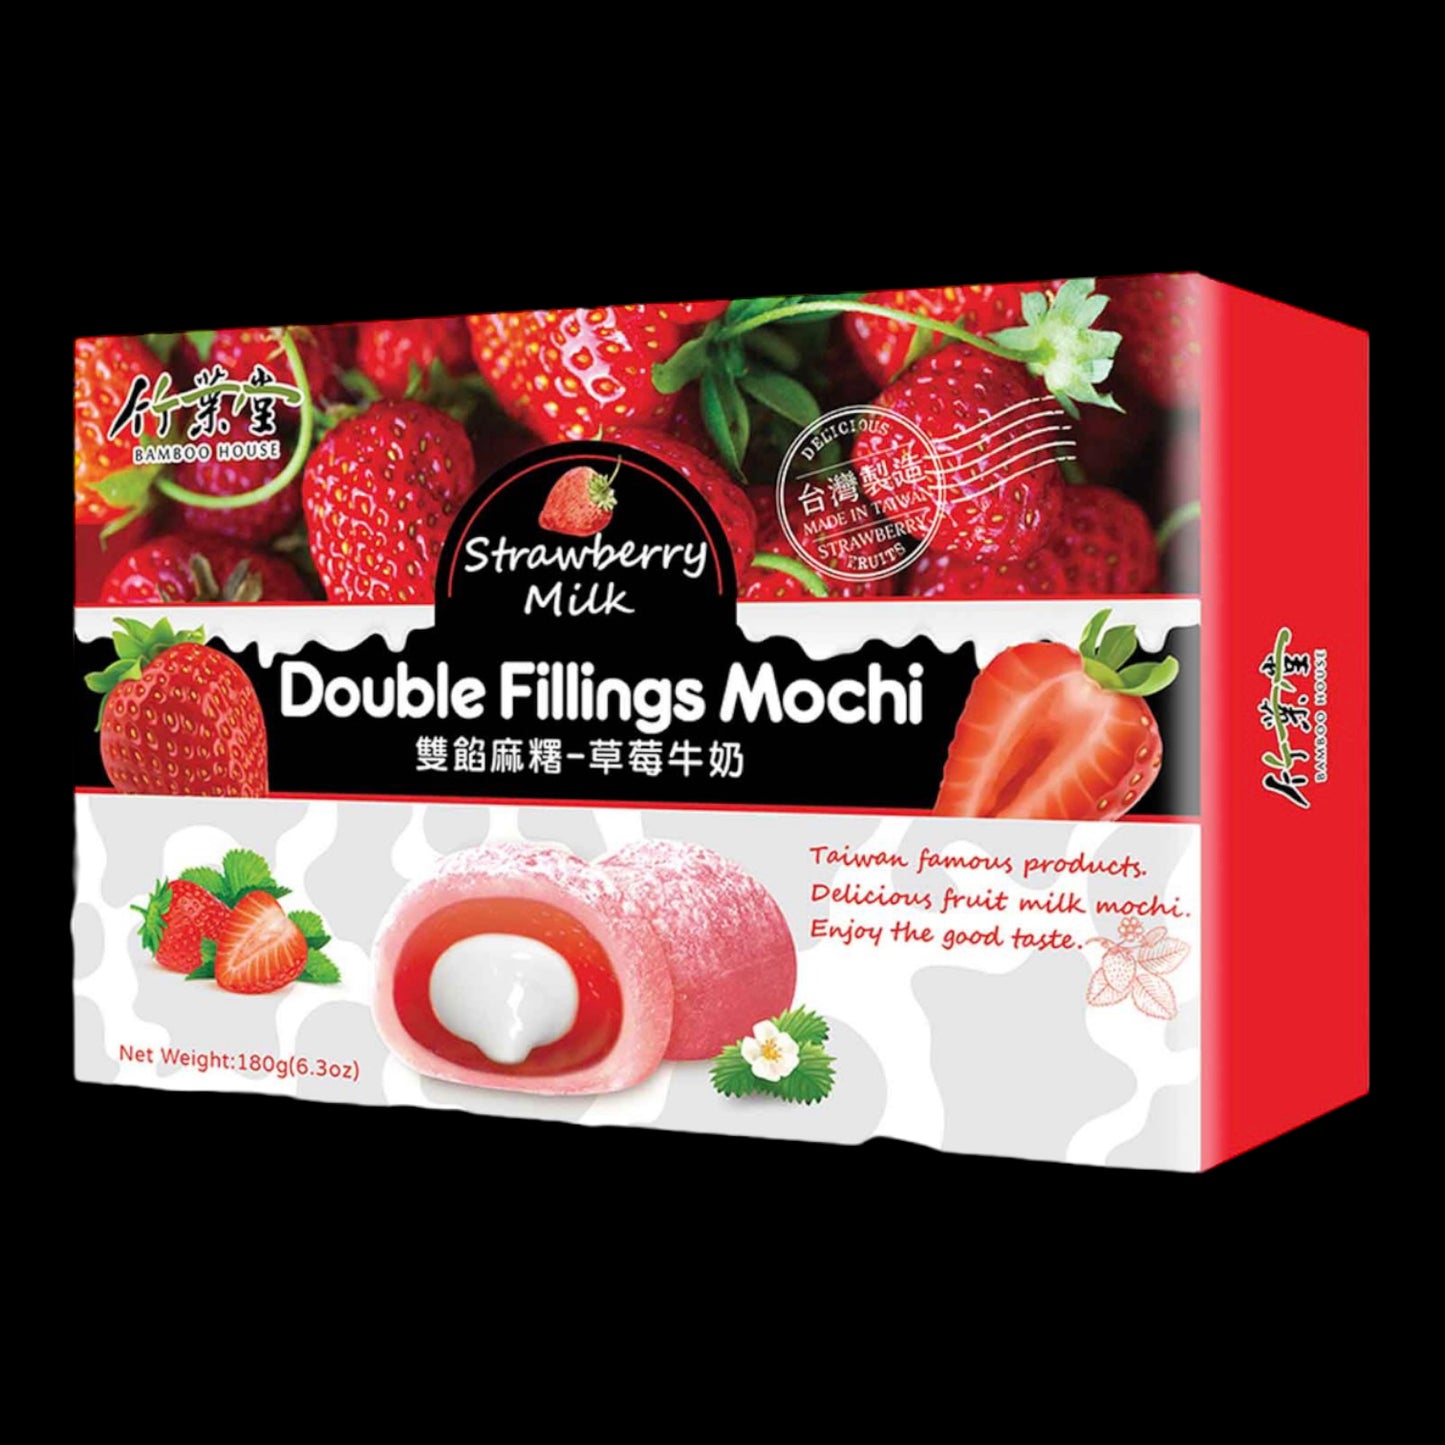 Bamboo House Double Fillings Mochi Strawberry Milk 180g